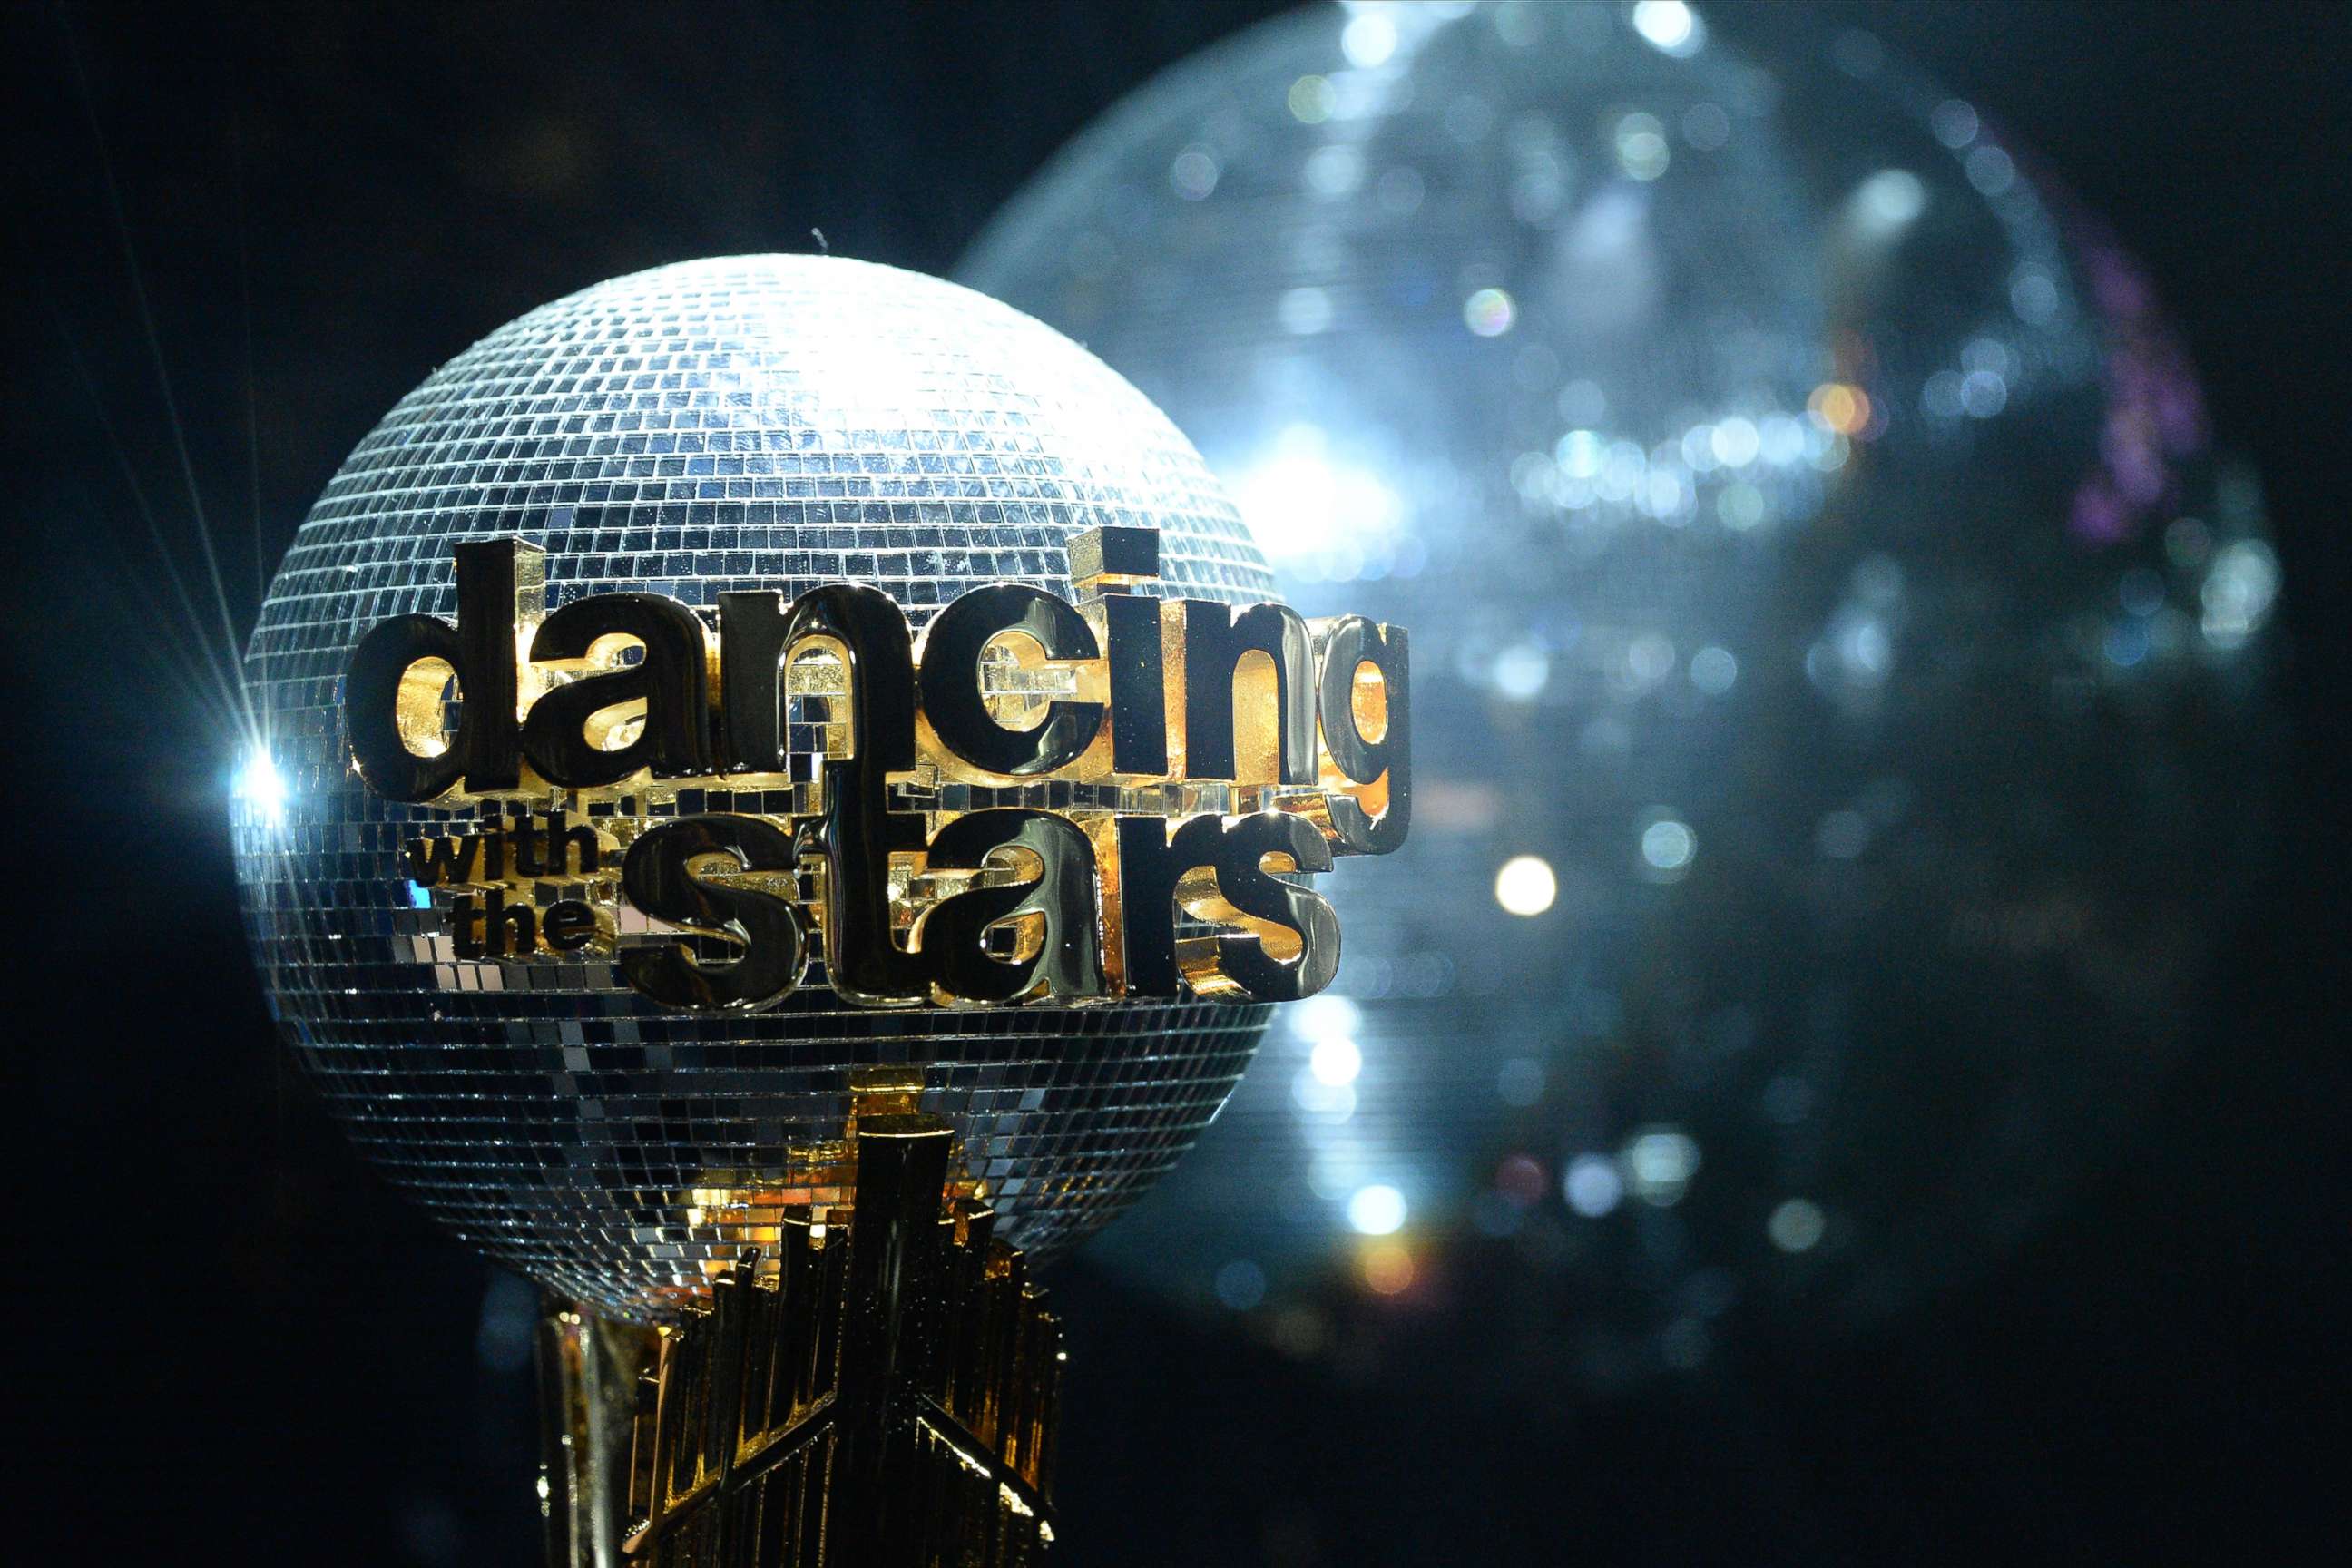 PHOTO: The coveted Mirrorball Trophy for "Dancing with the Stars," is seen on Nov.2, 2021.